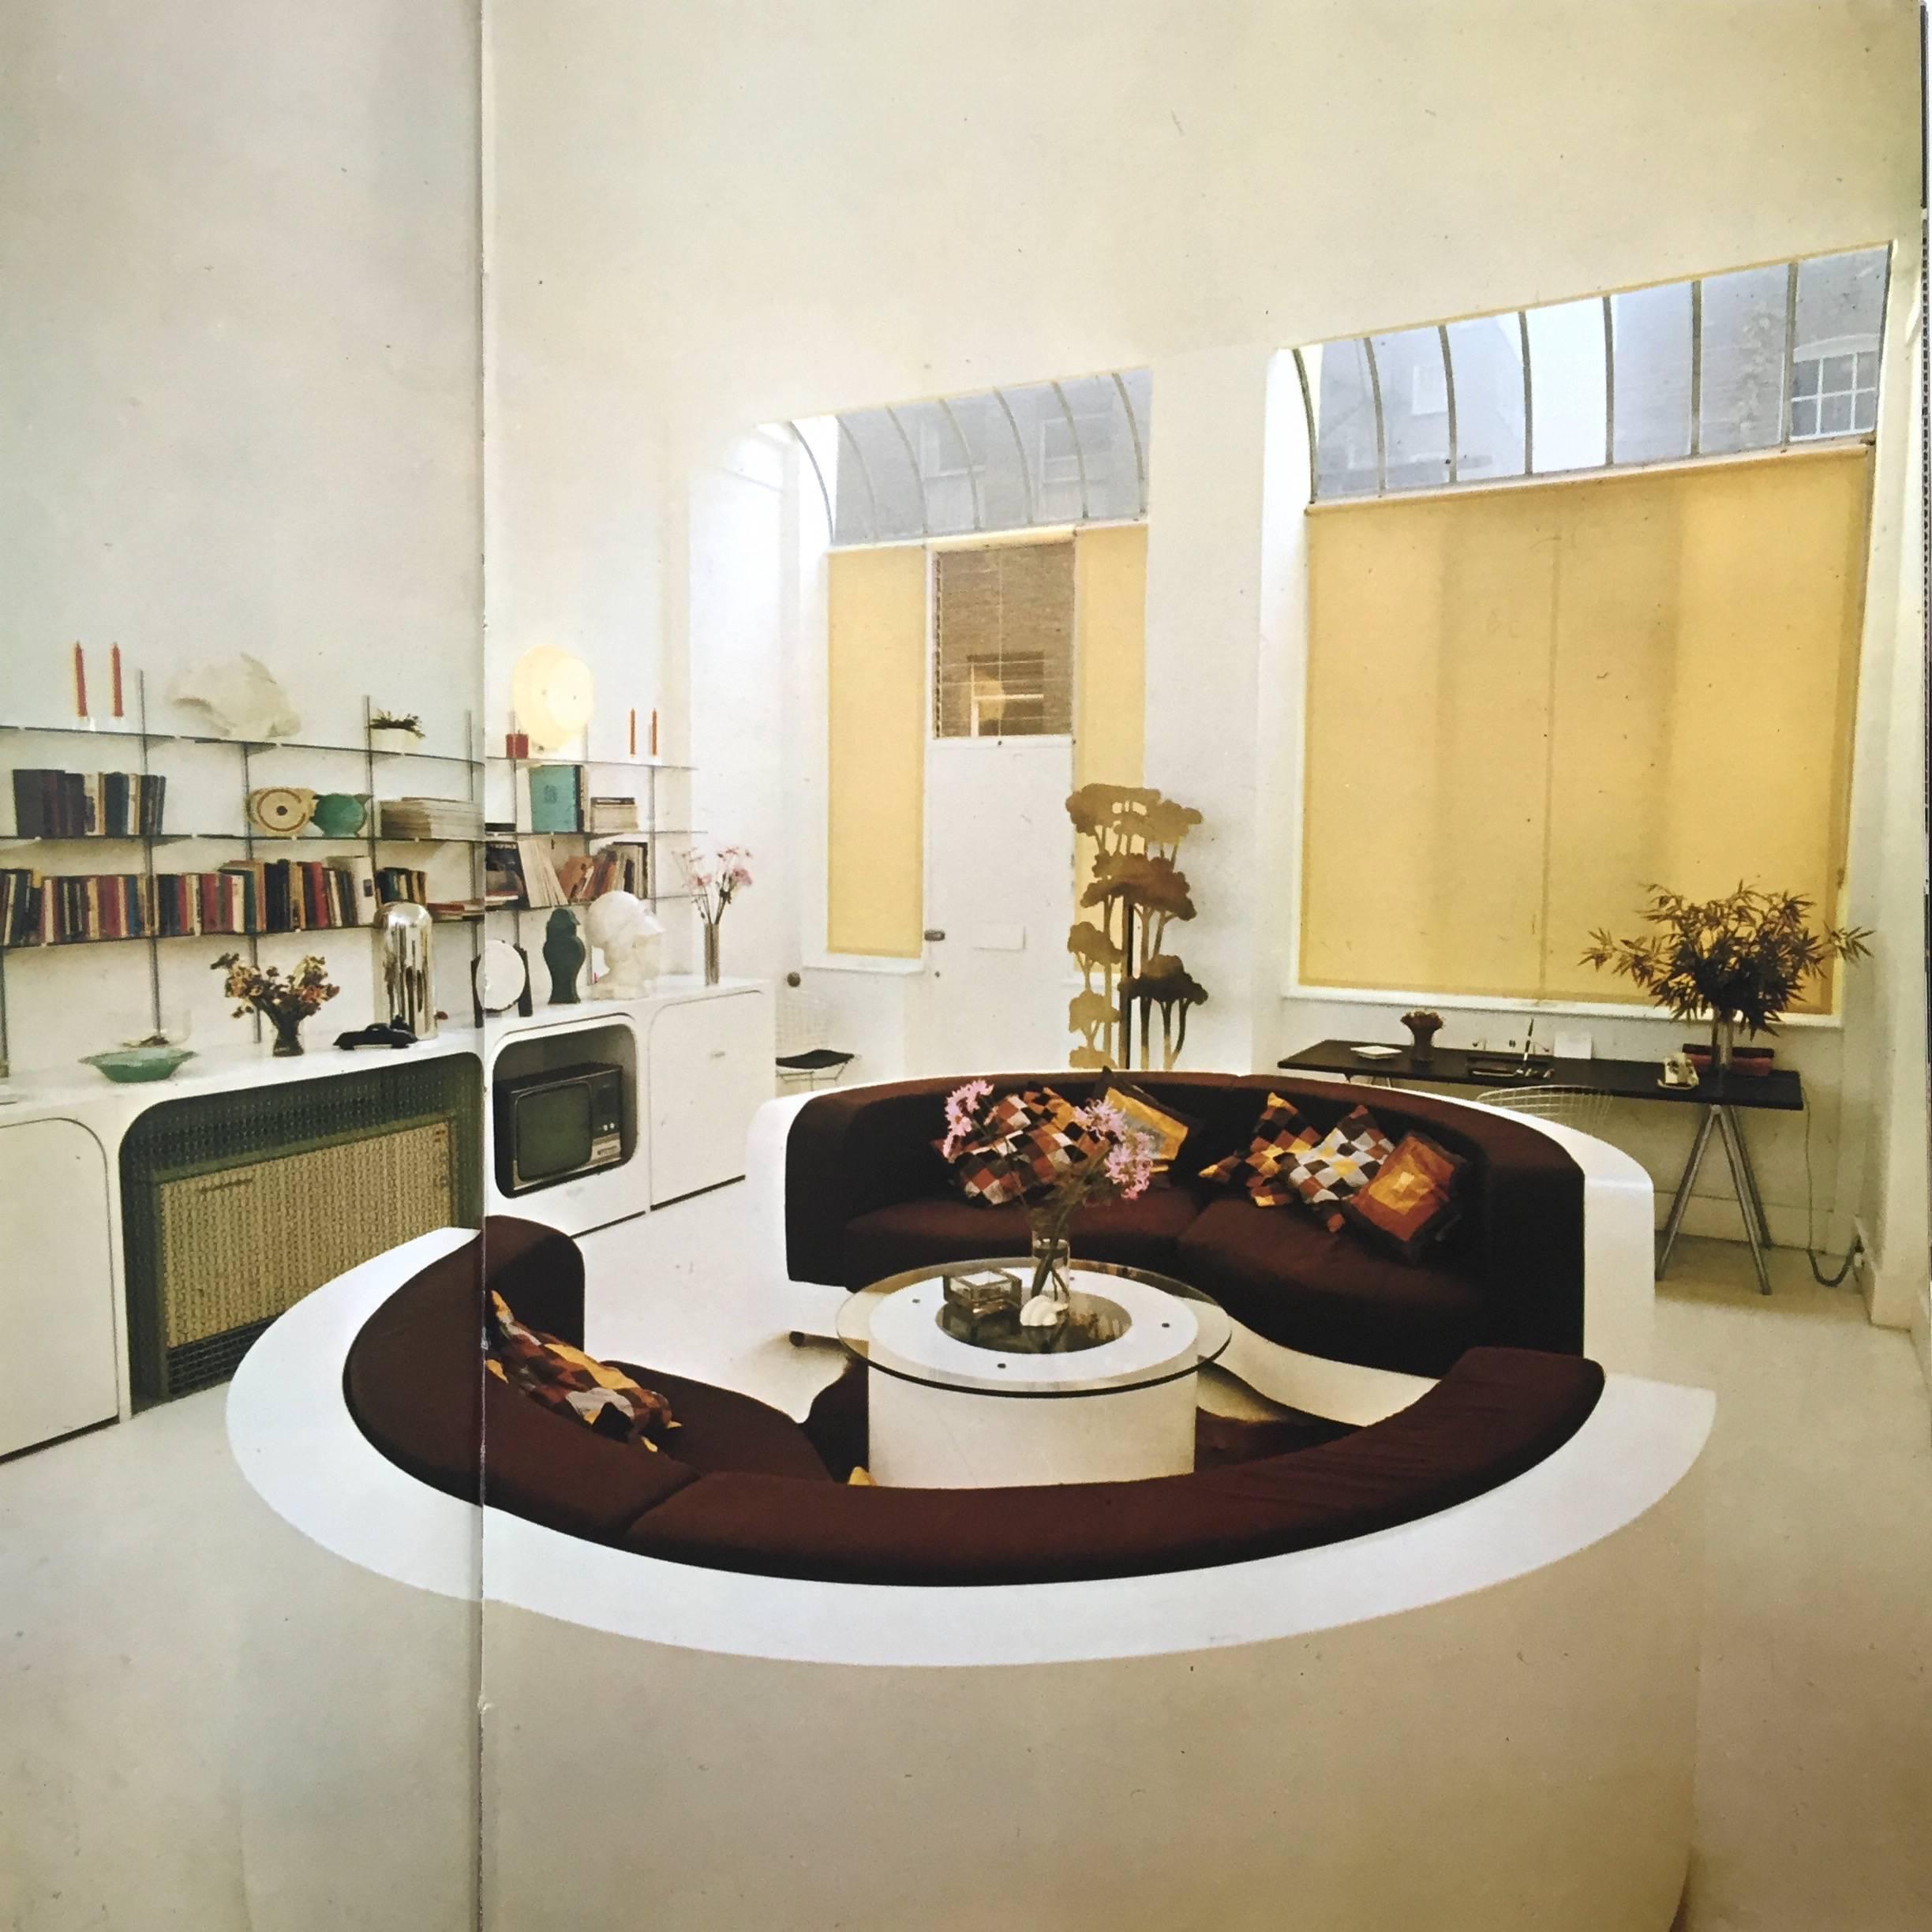 First UK edition, published by Collins in association with the Condé Nast Publications Ltd, 1971.

A colourful and exciting collection of the best modern interiors of the era, from the elegant furniture and fittings of the Modernist house, to the